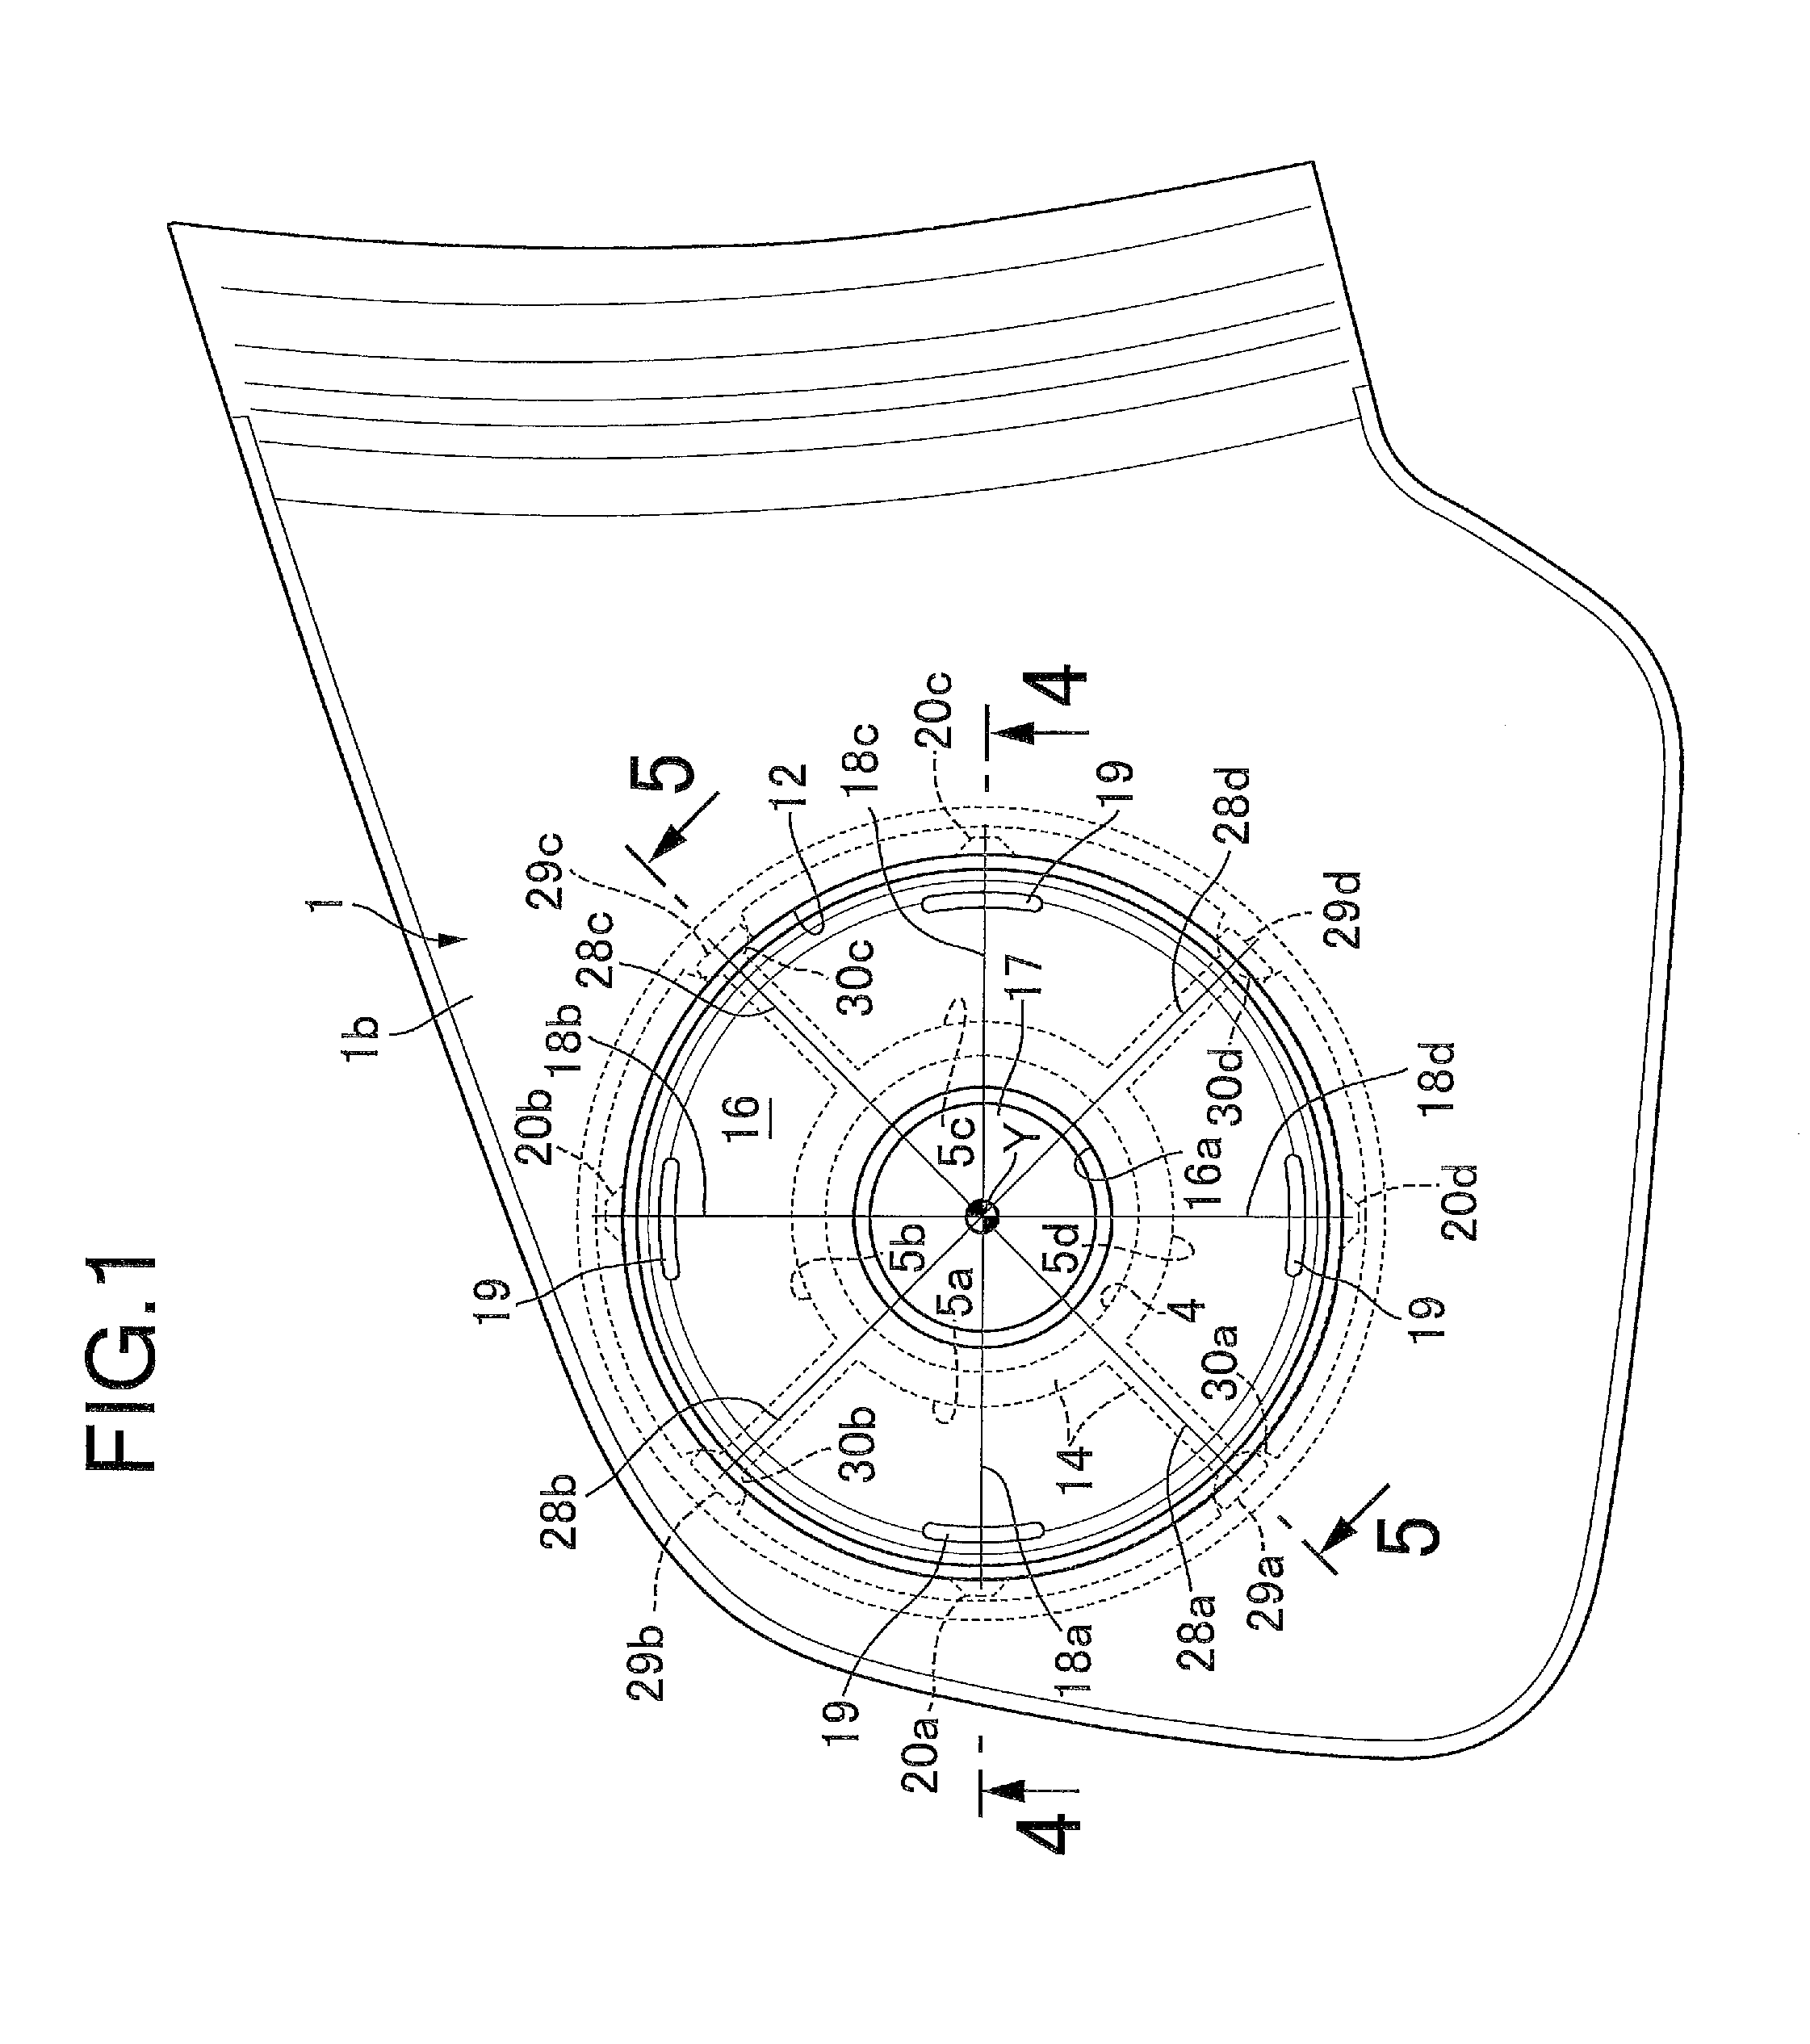 Four-direction switch device